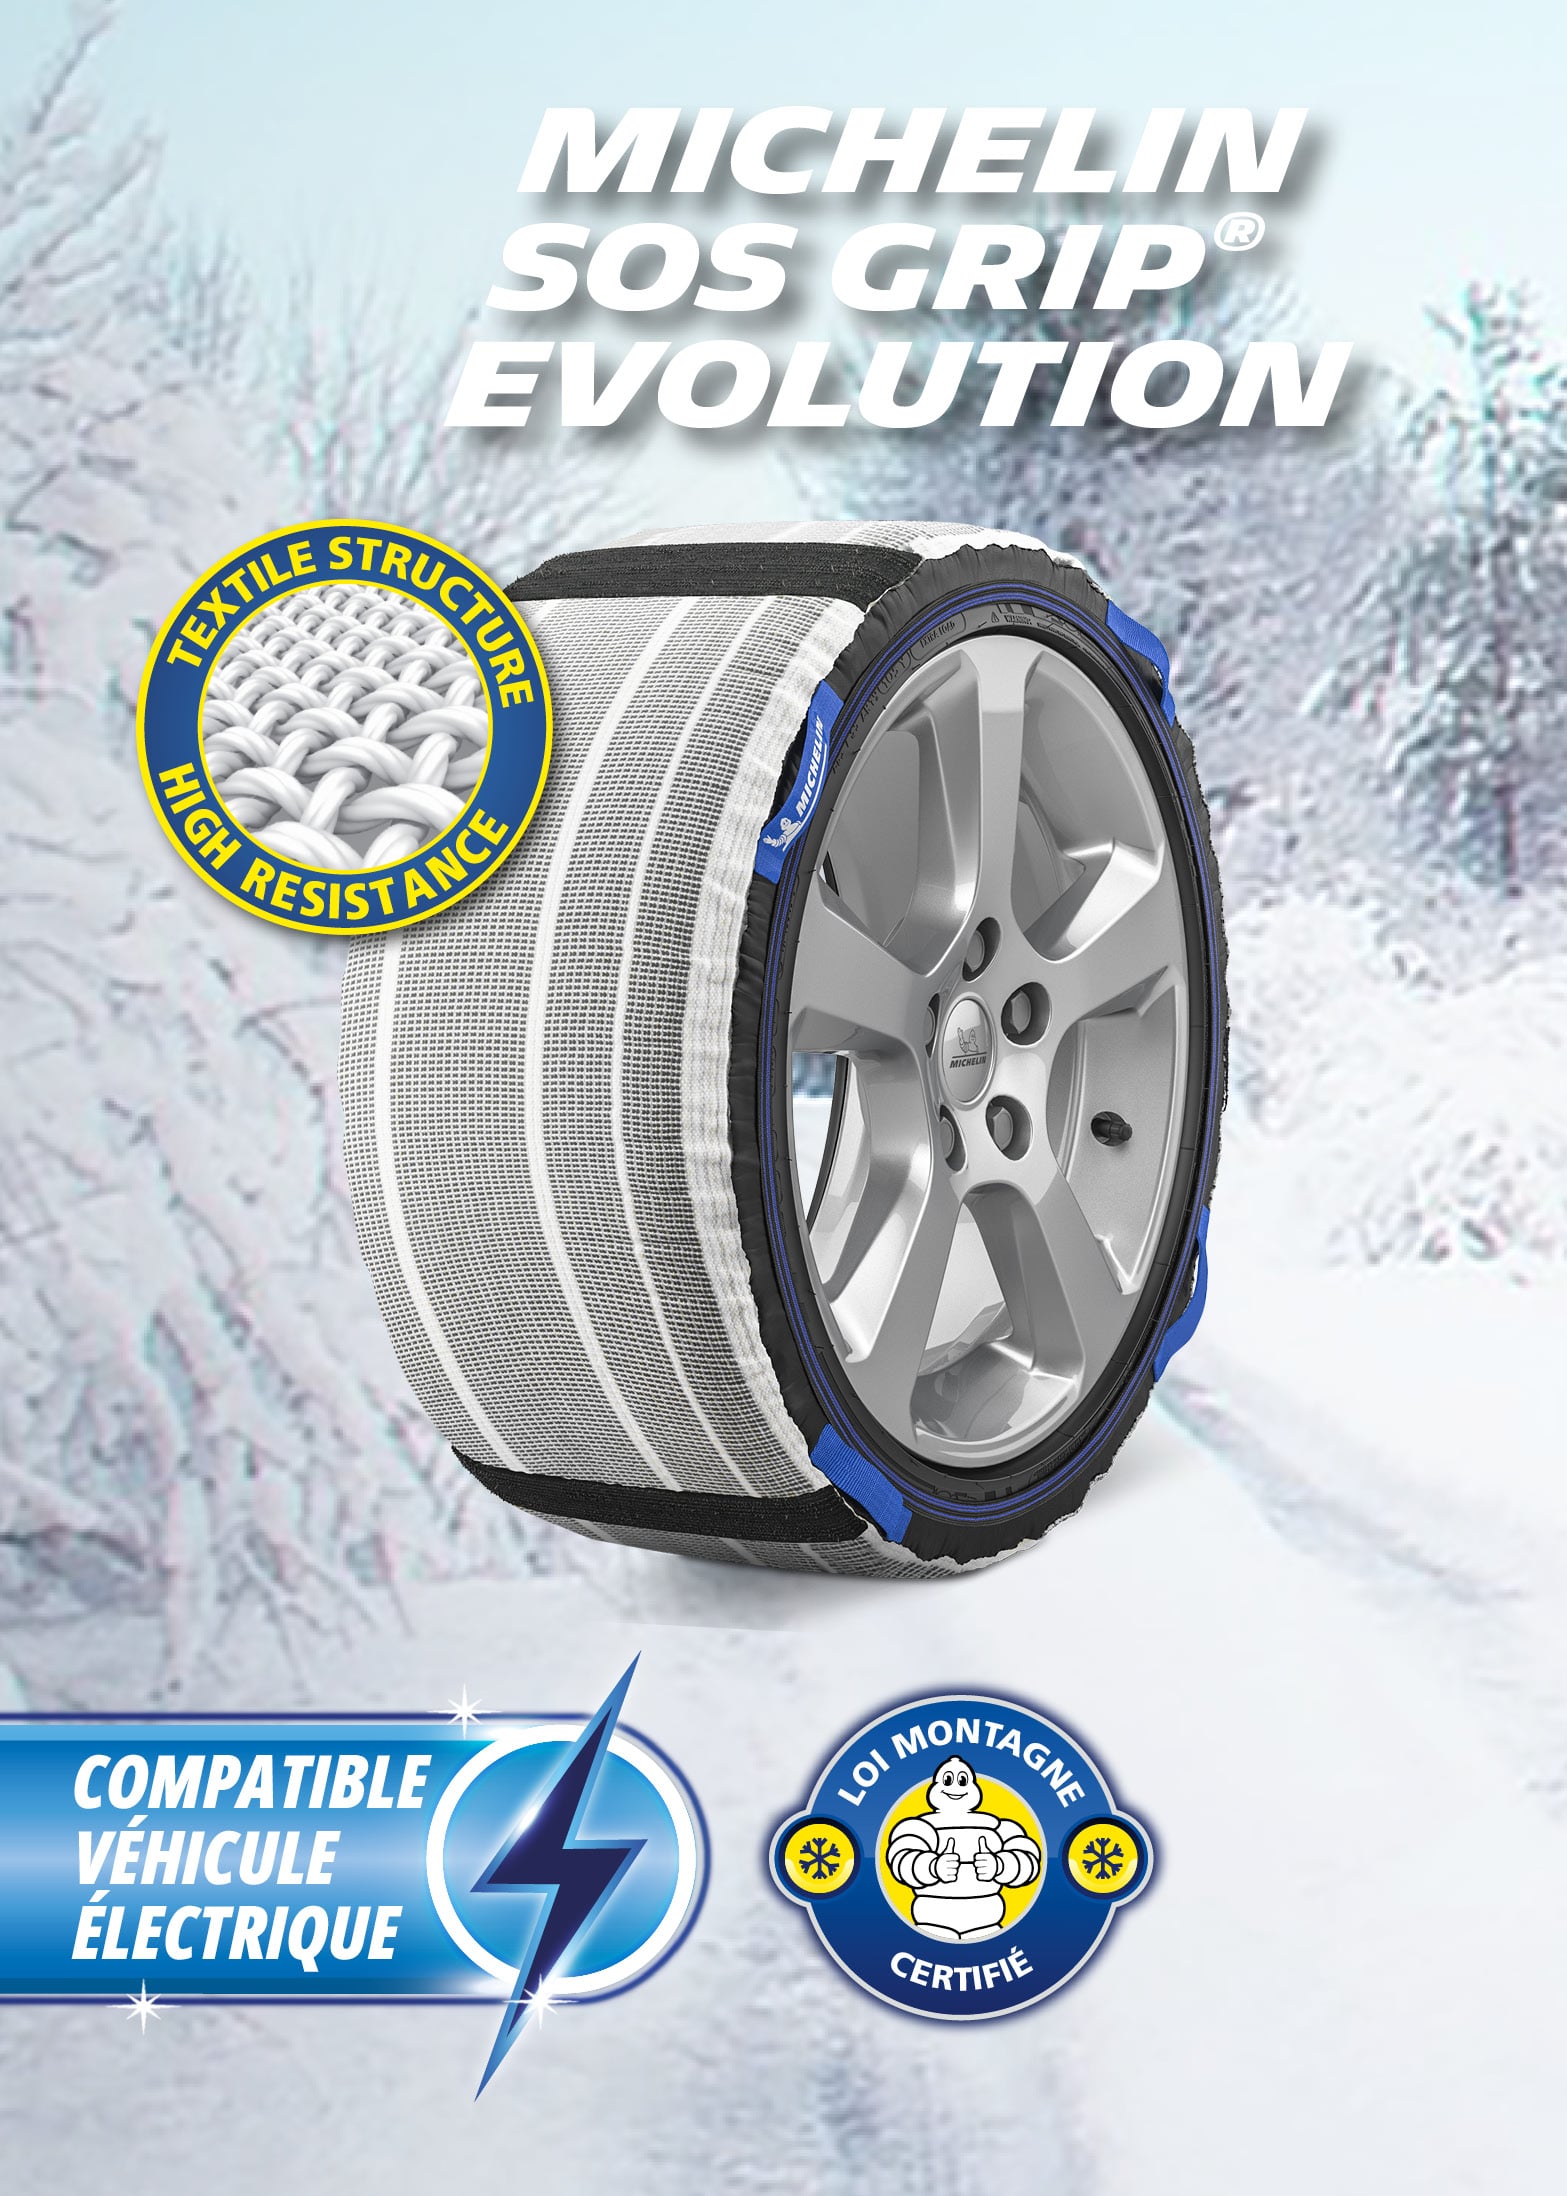  Michelin 008312 Easy Grip Snow Chains Evolution Group